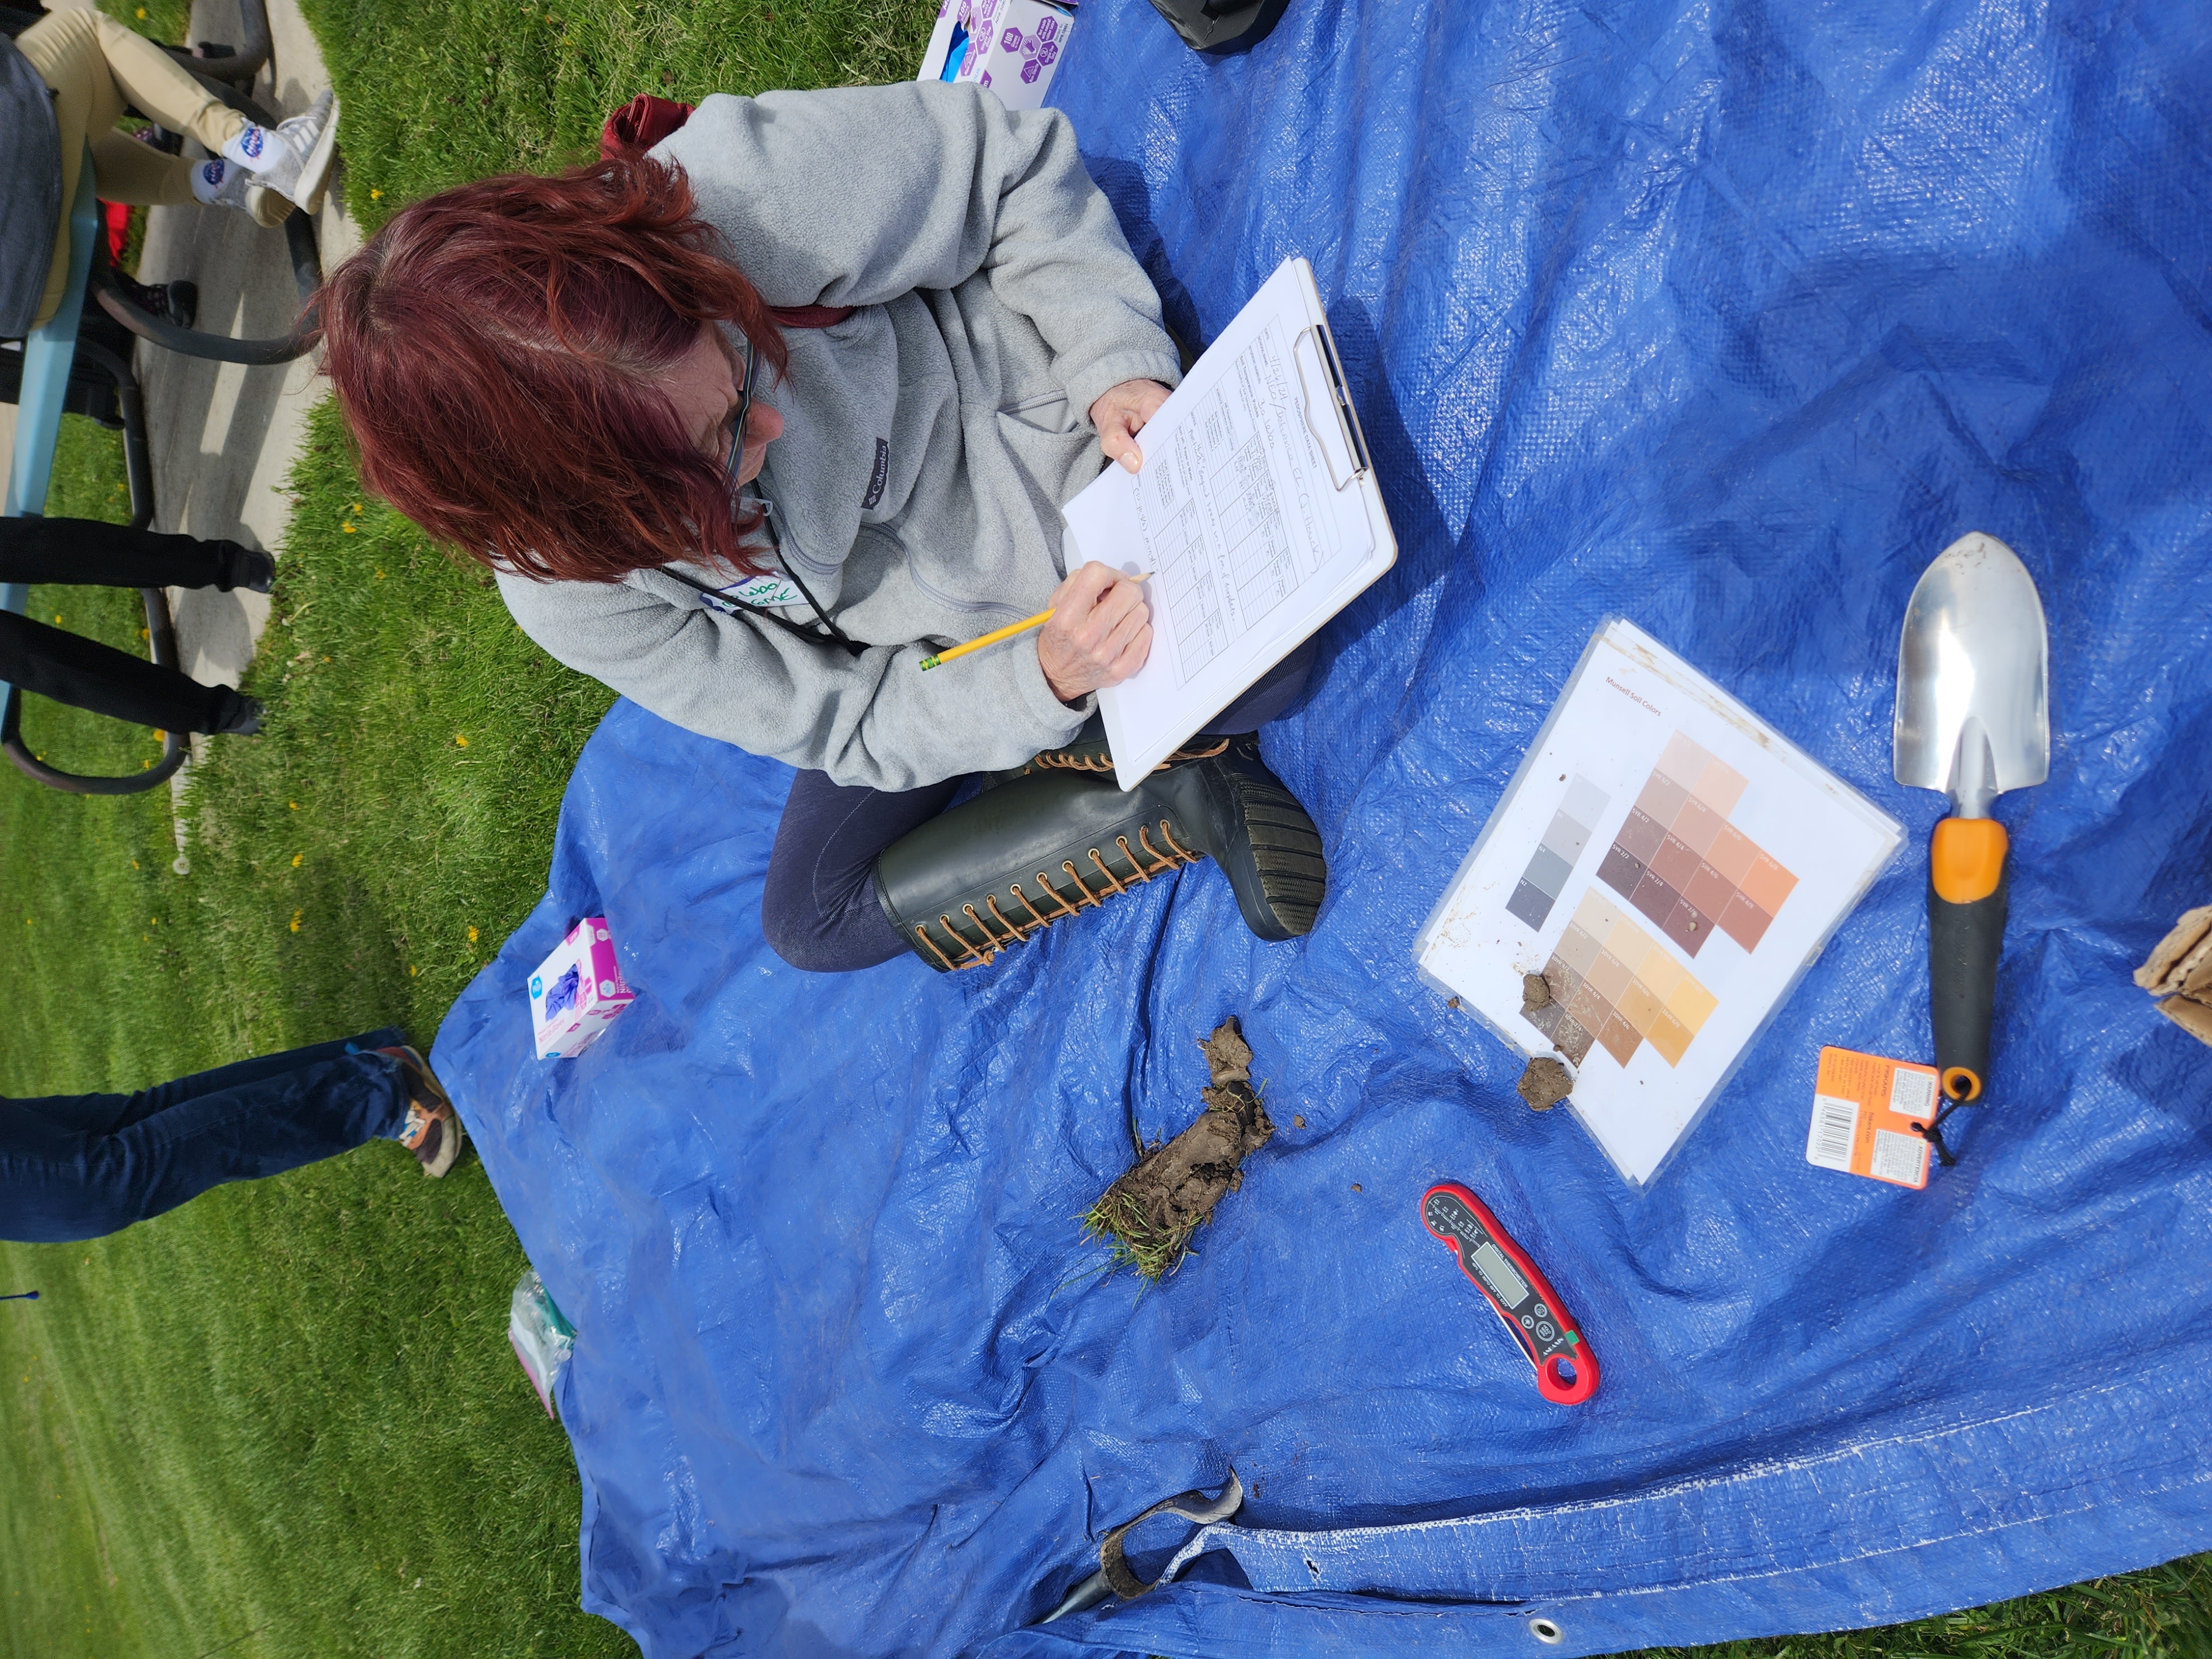 Bo Lebo sits on a tarp on the ground to make observations of a soil sample